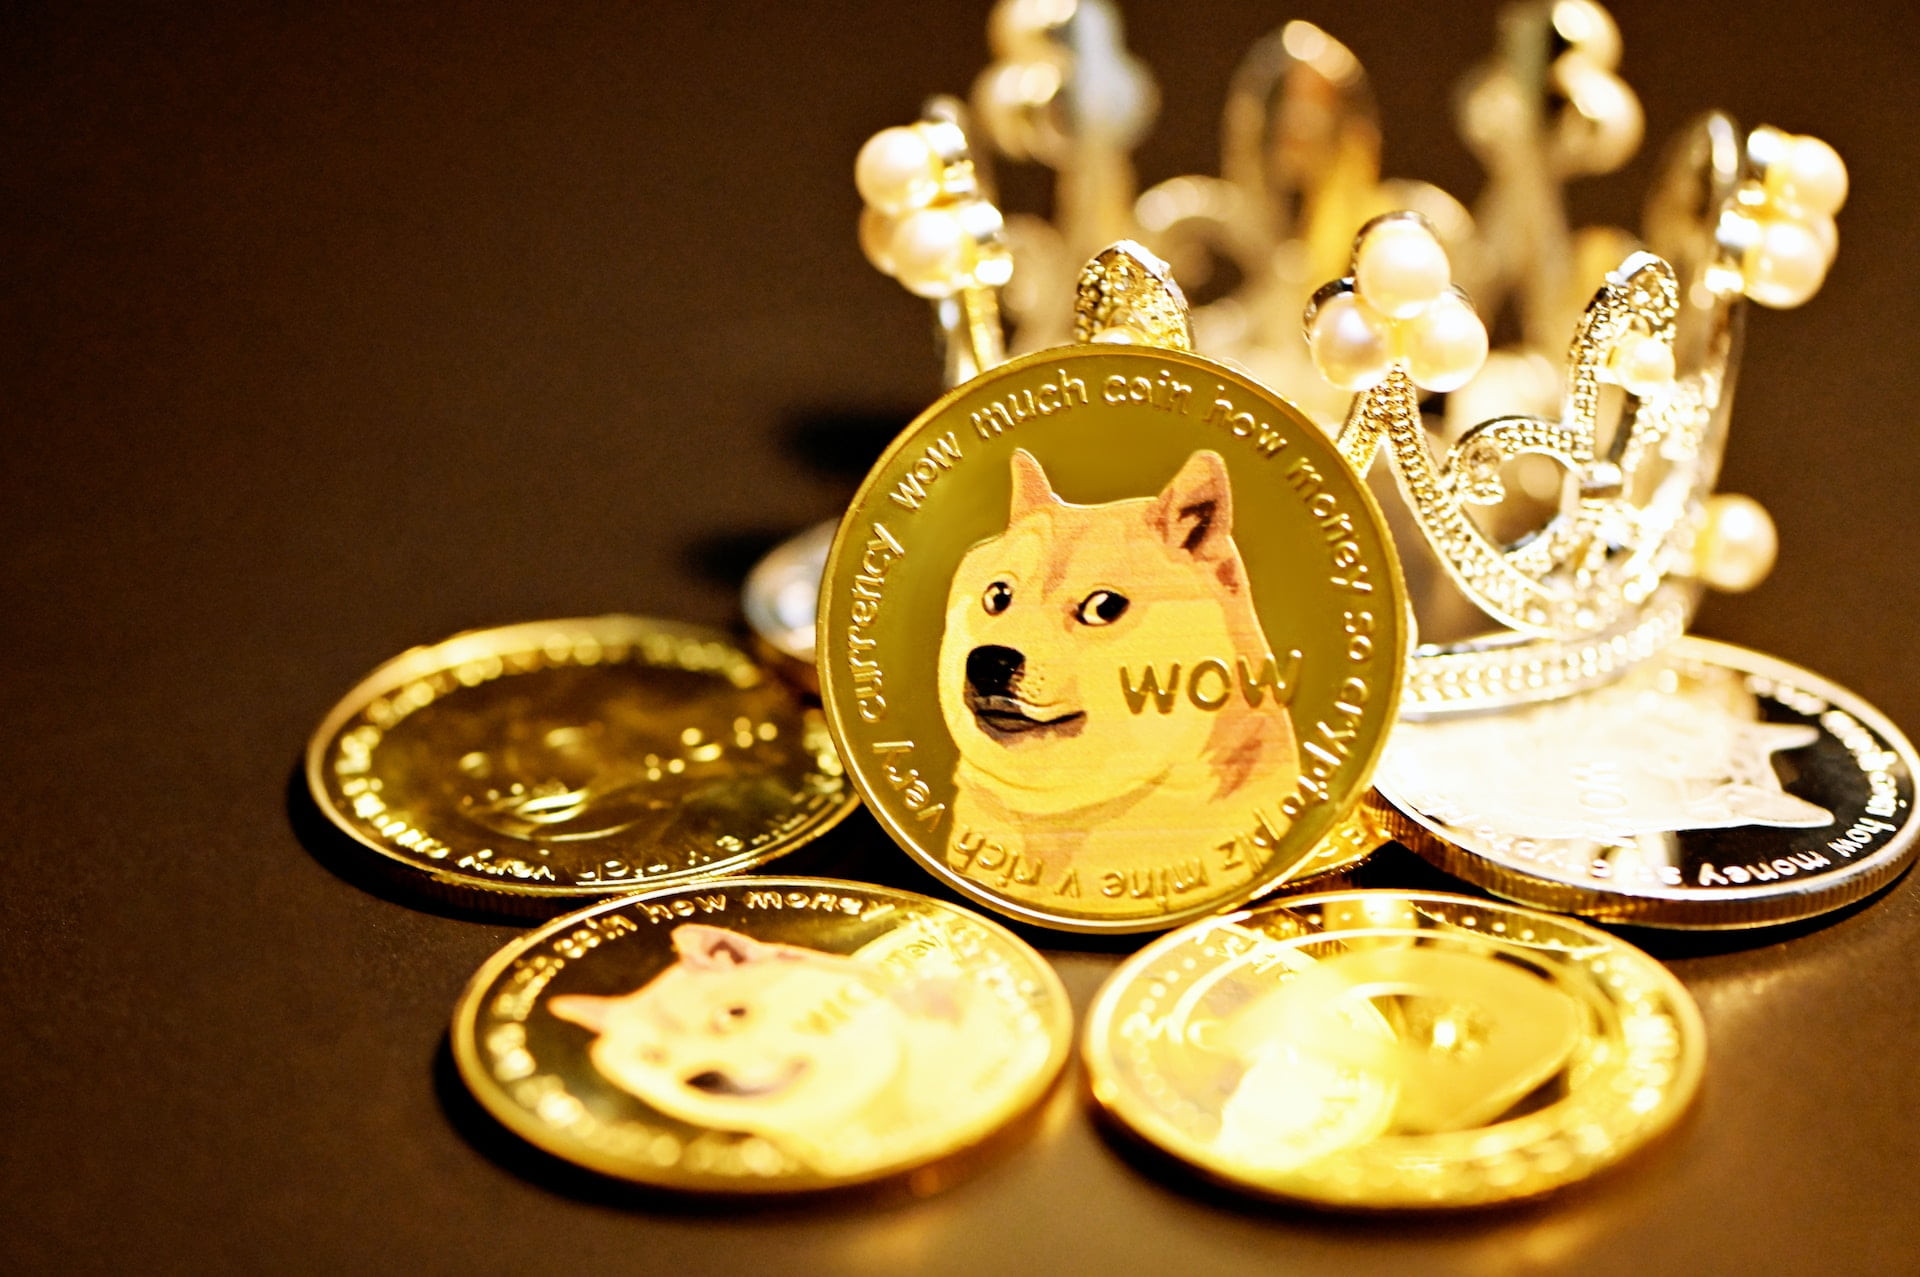 Shiba Inu coin as Shibarium is set to go live in August